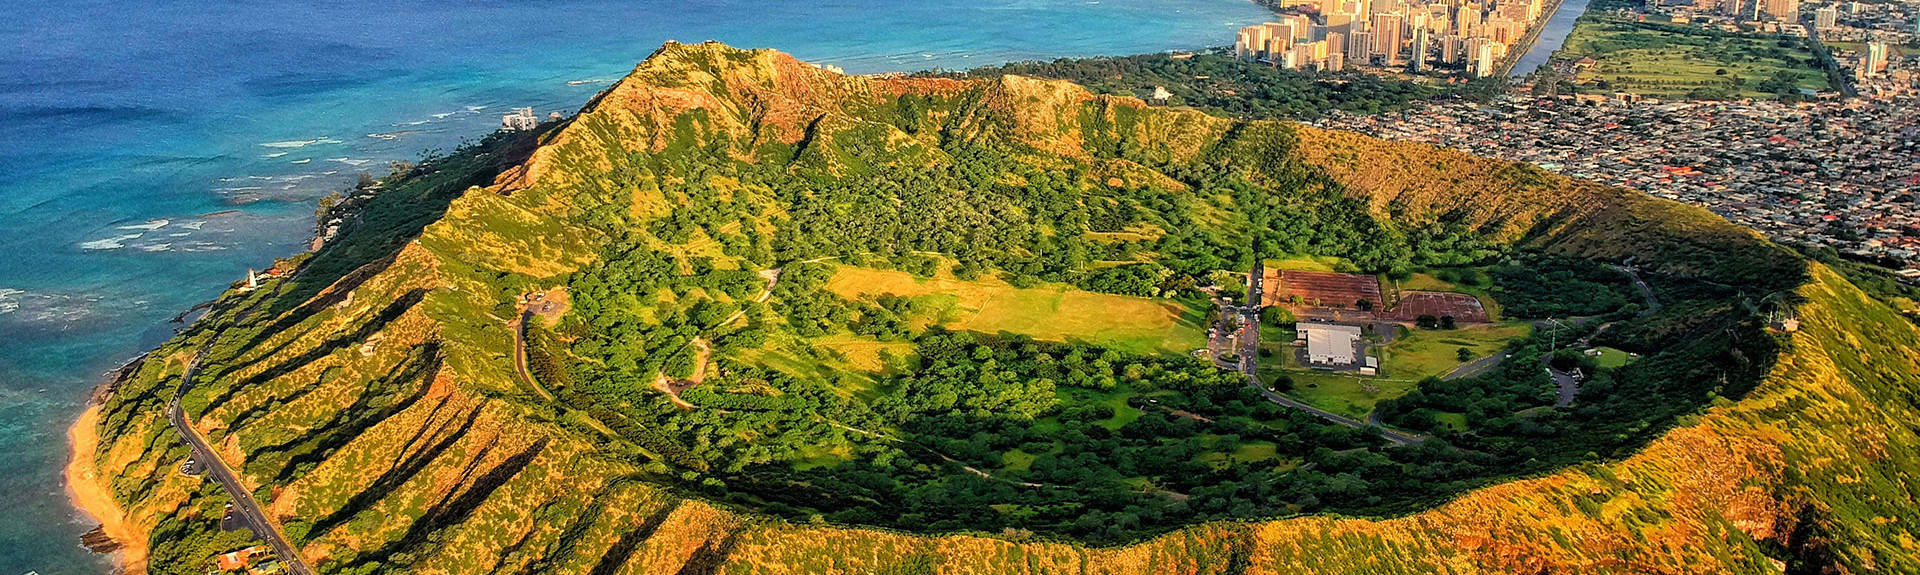 https://www.hawaii-guide.com/images/made/oahu-attractions-guide_1920_575_90_s_c1_c_c_0_0.jpg